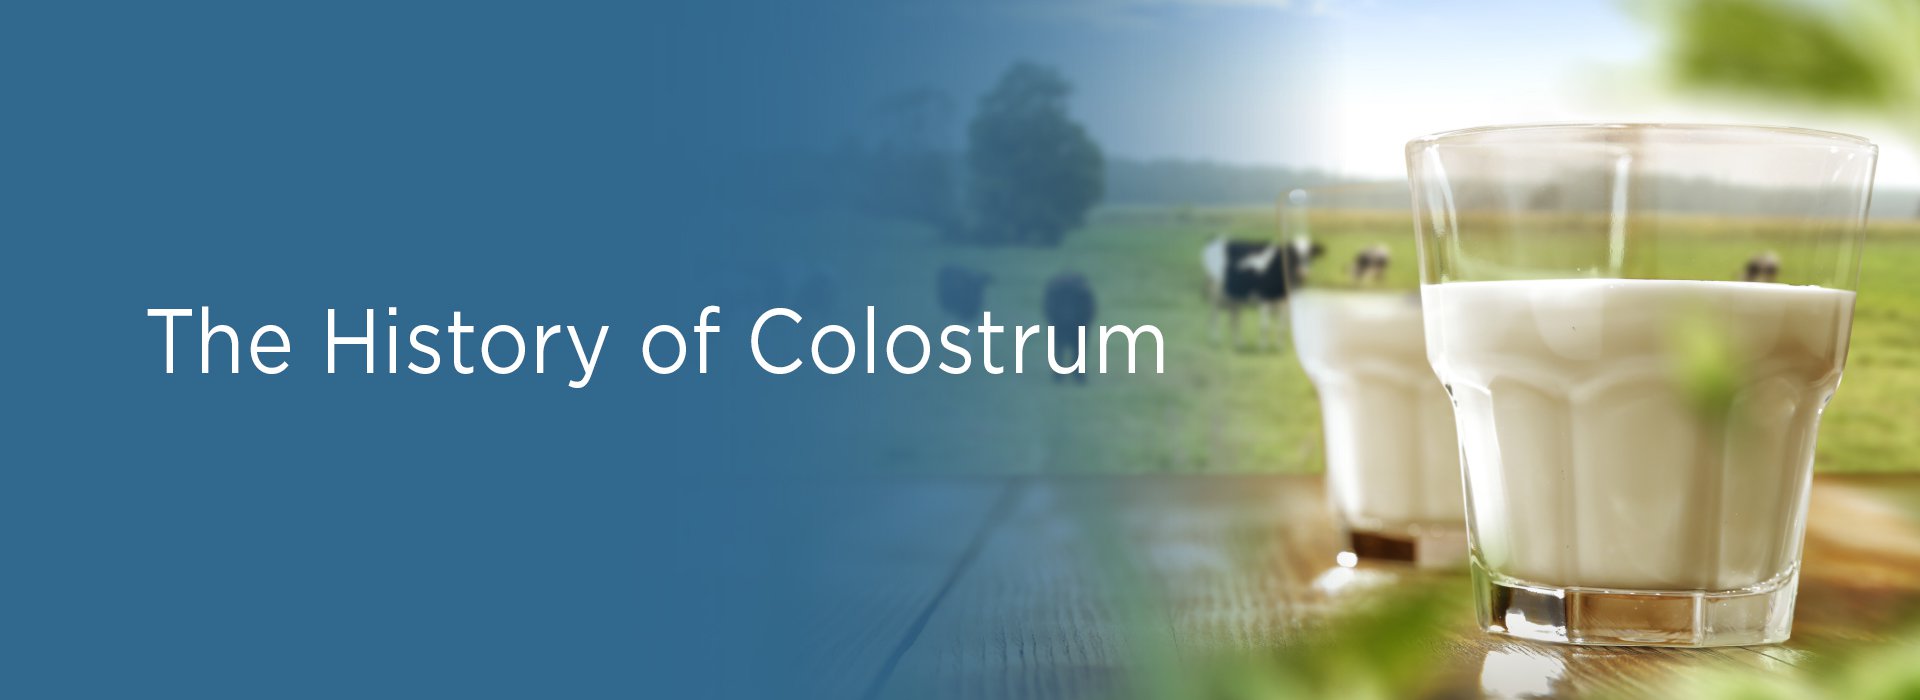 New Image International: The History of Colostrum